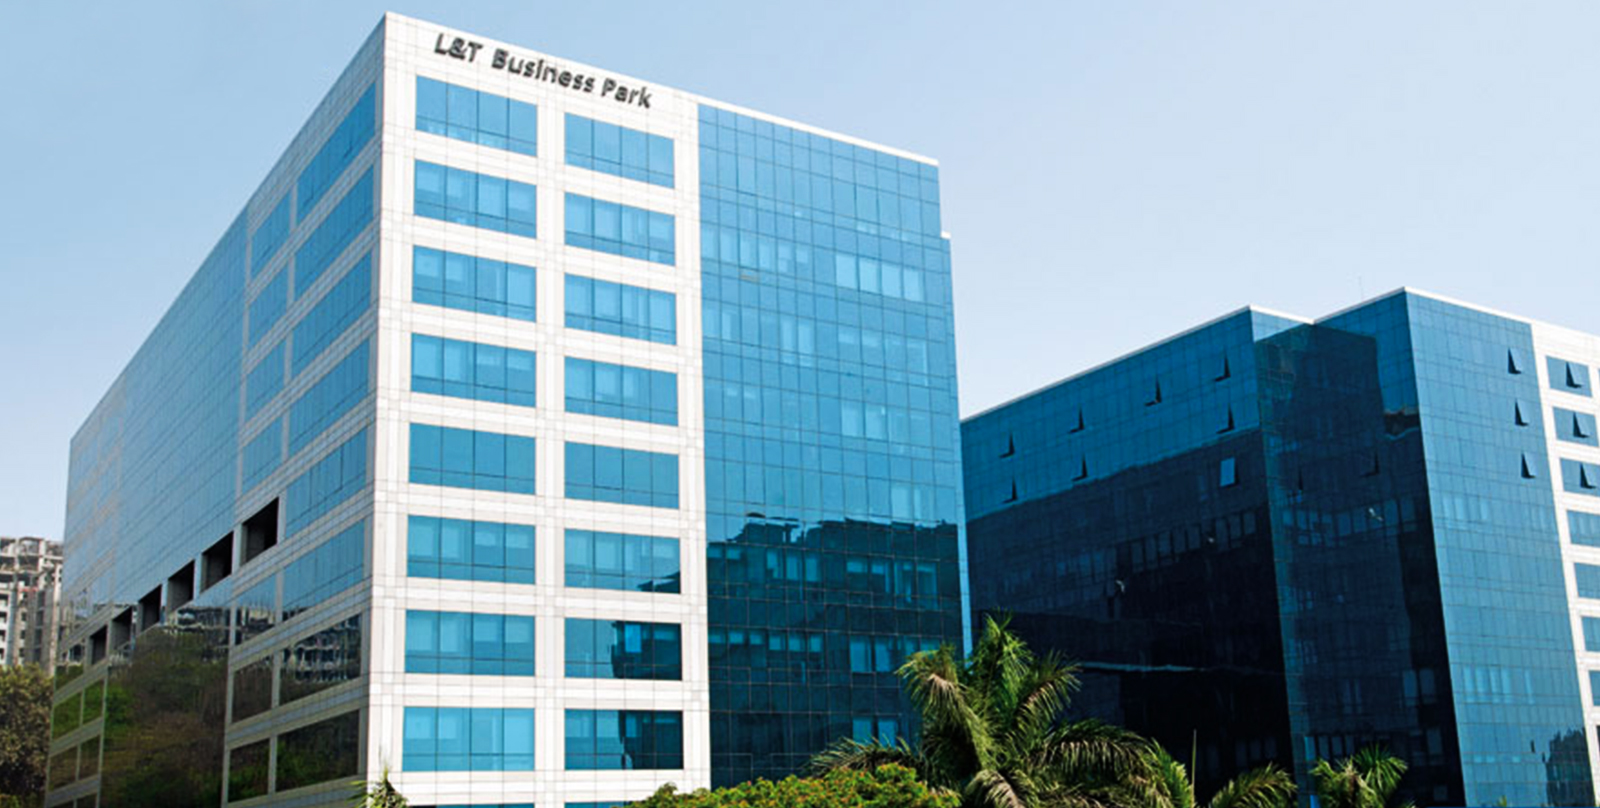 commercial-office-space-for-rent-lease-in-andheri-east-mumbai-l-t-business-park-in-powai